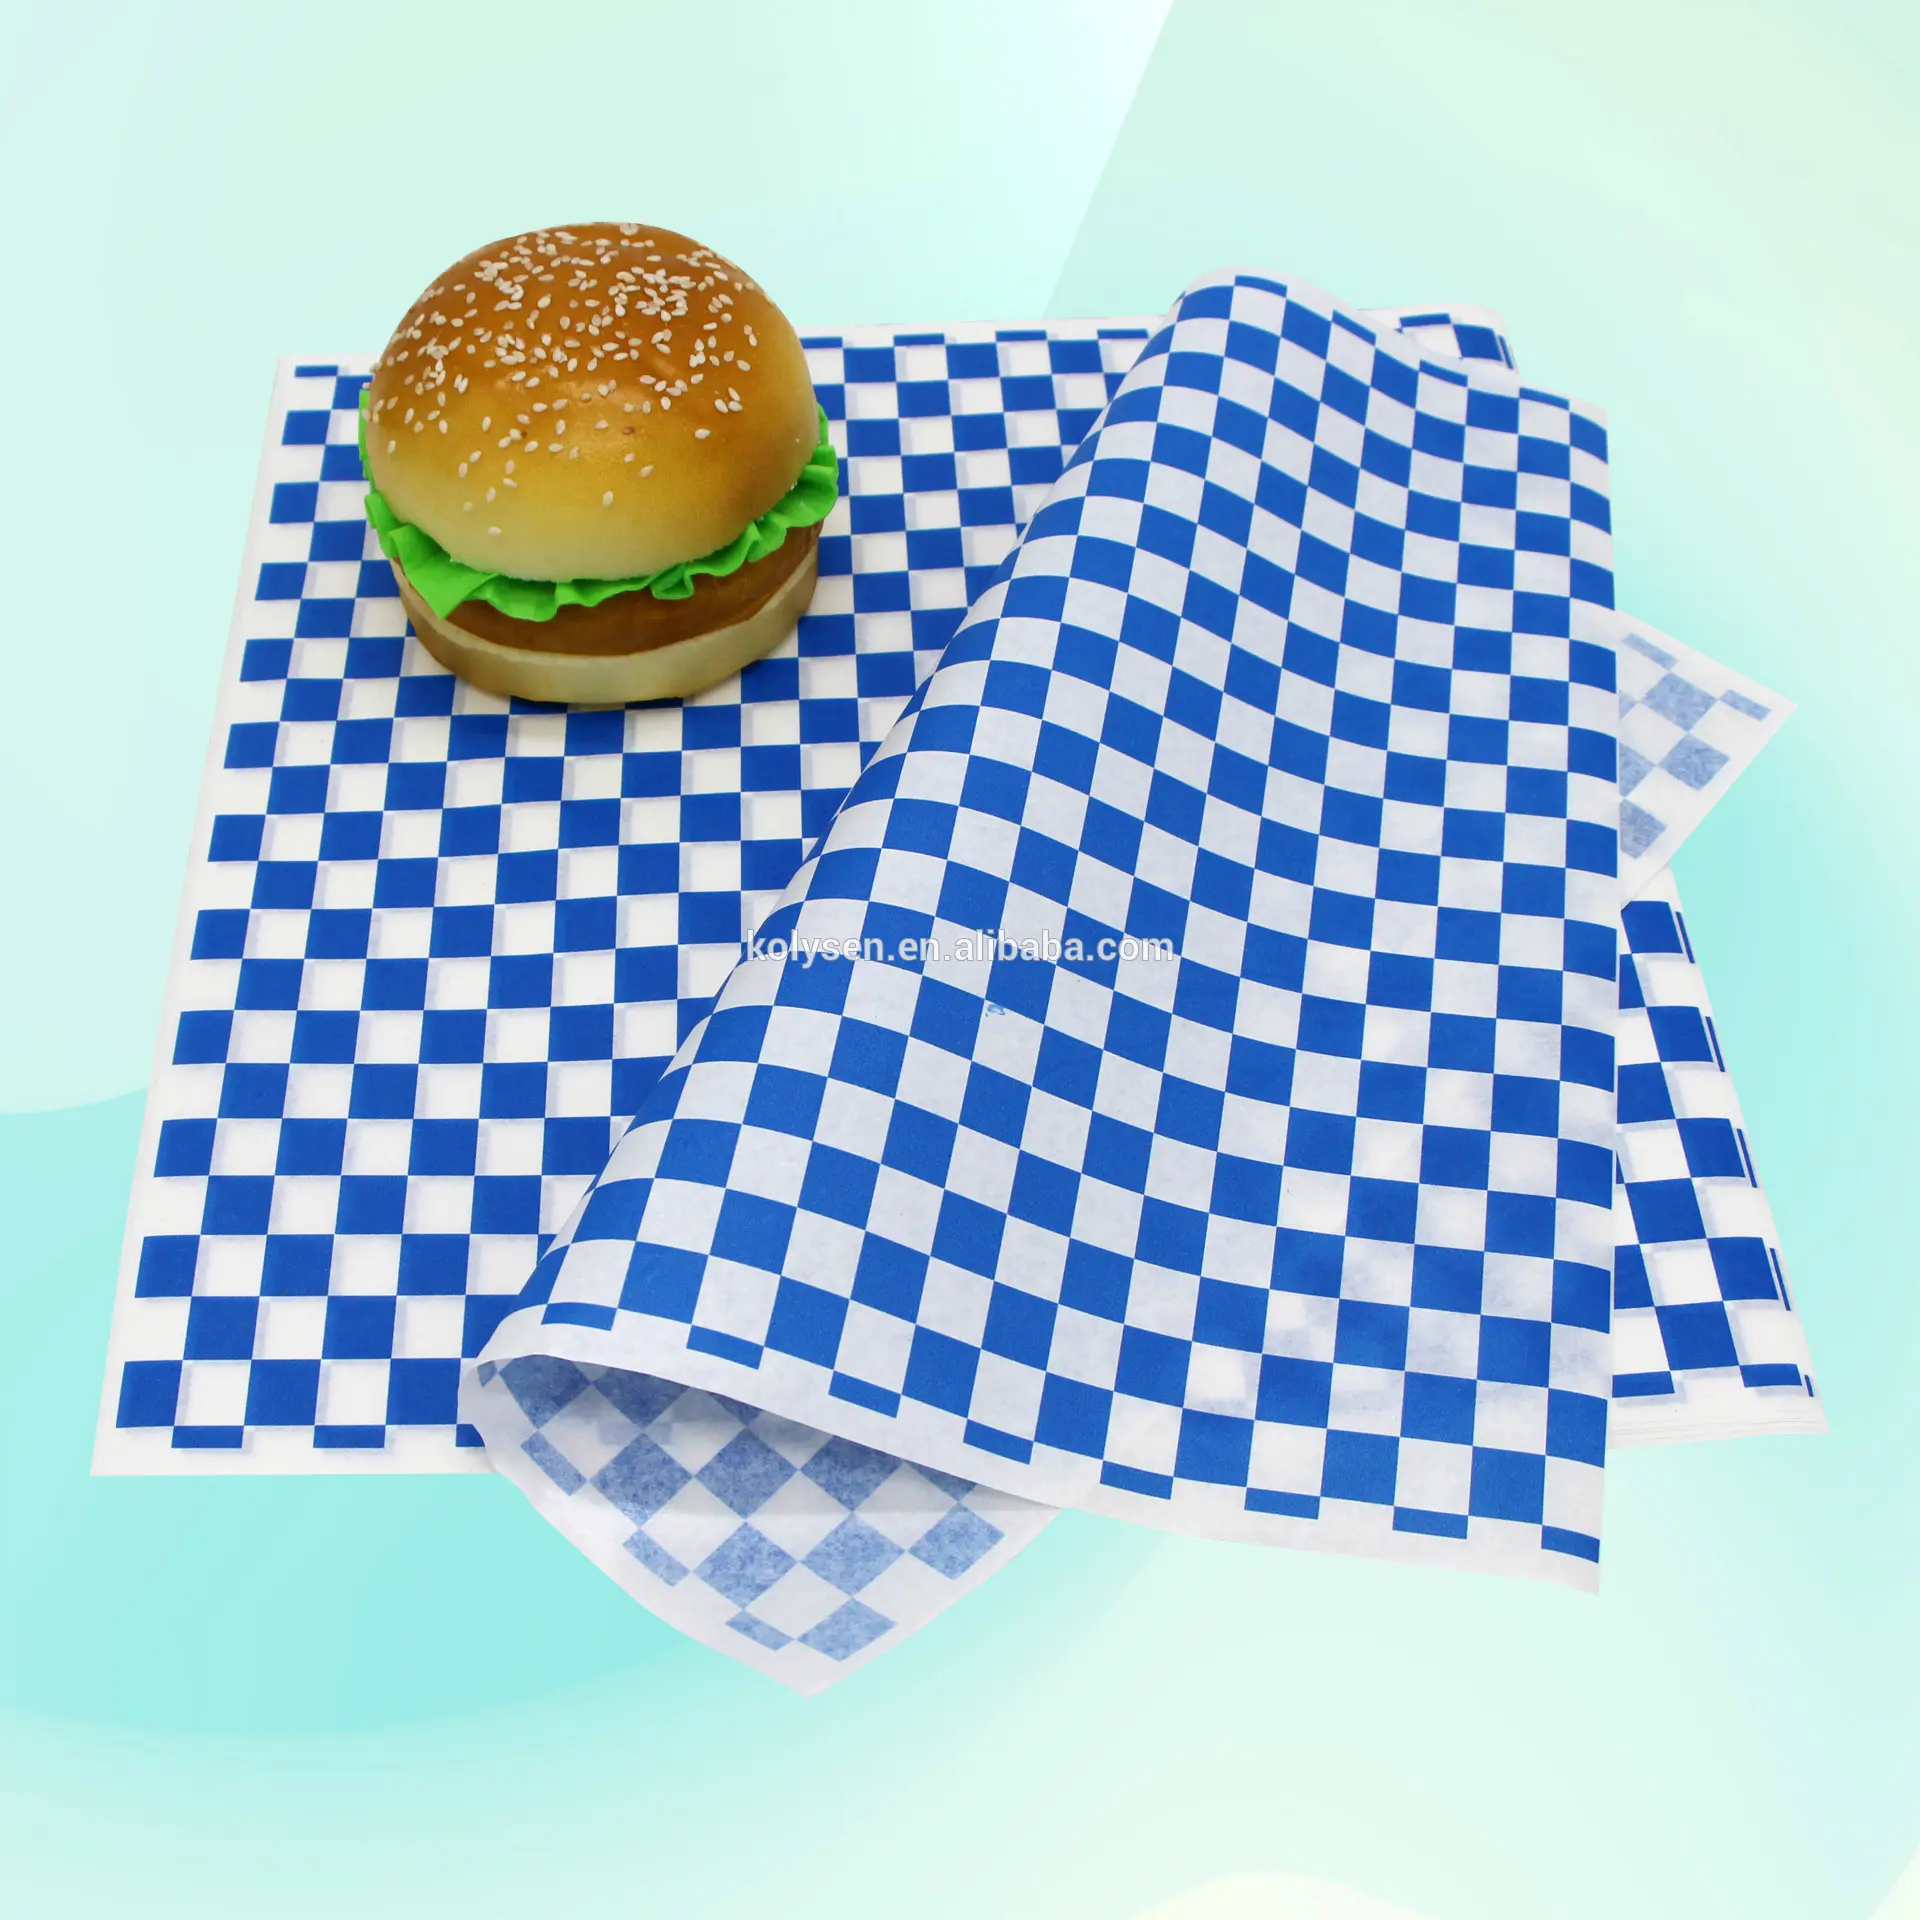 Customized Printed Greaseproof Paper for Burger/Sandwich Wrapping